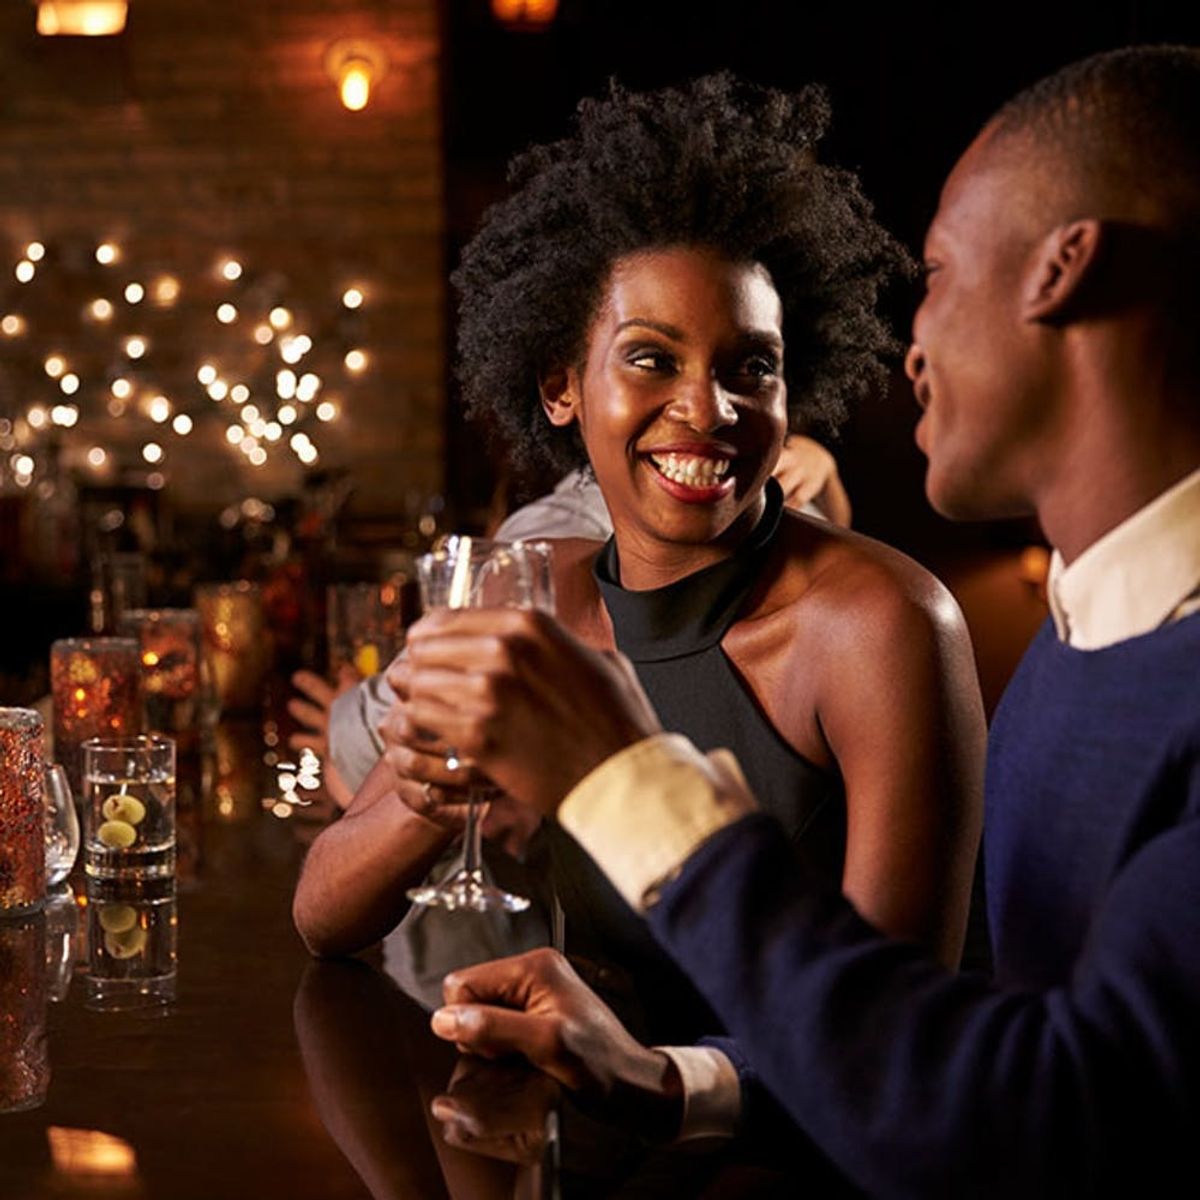 11 Tips for Reducing First Date Nerves